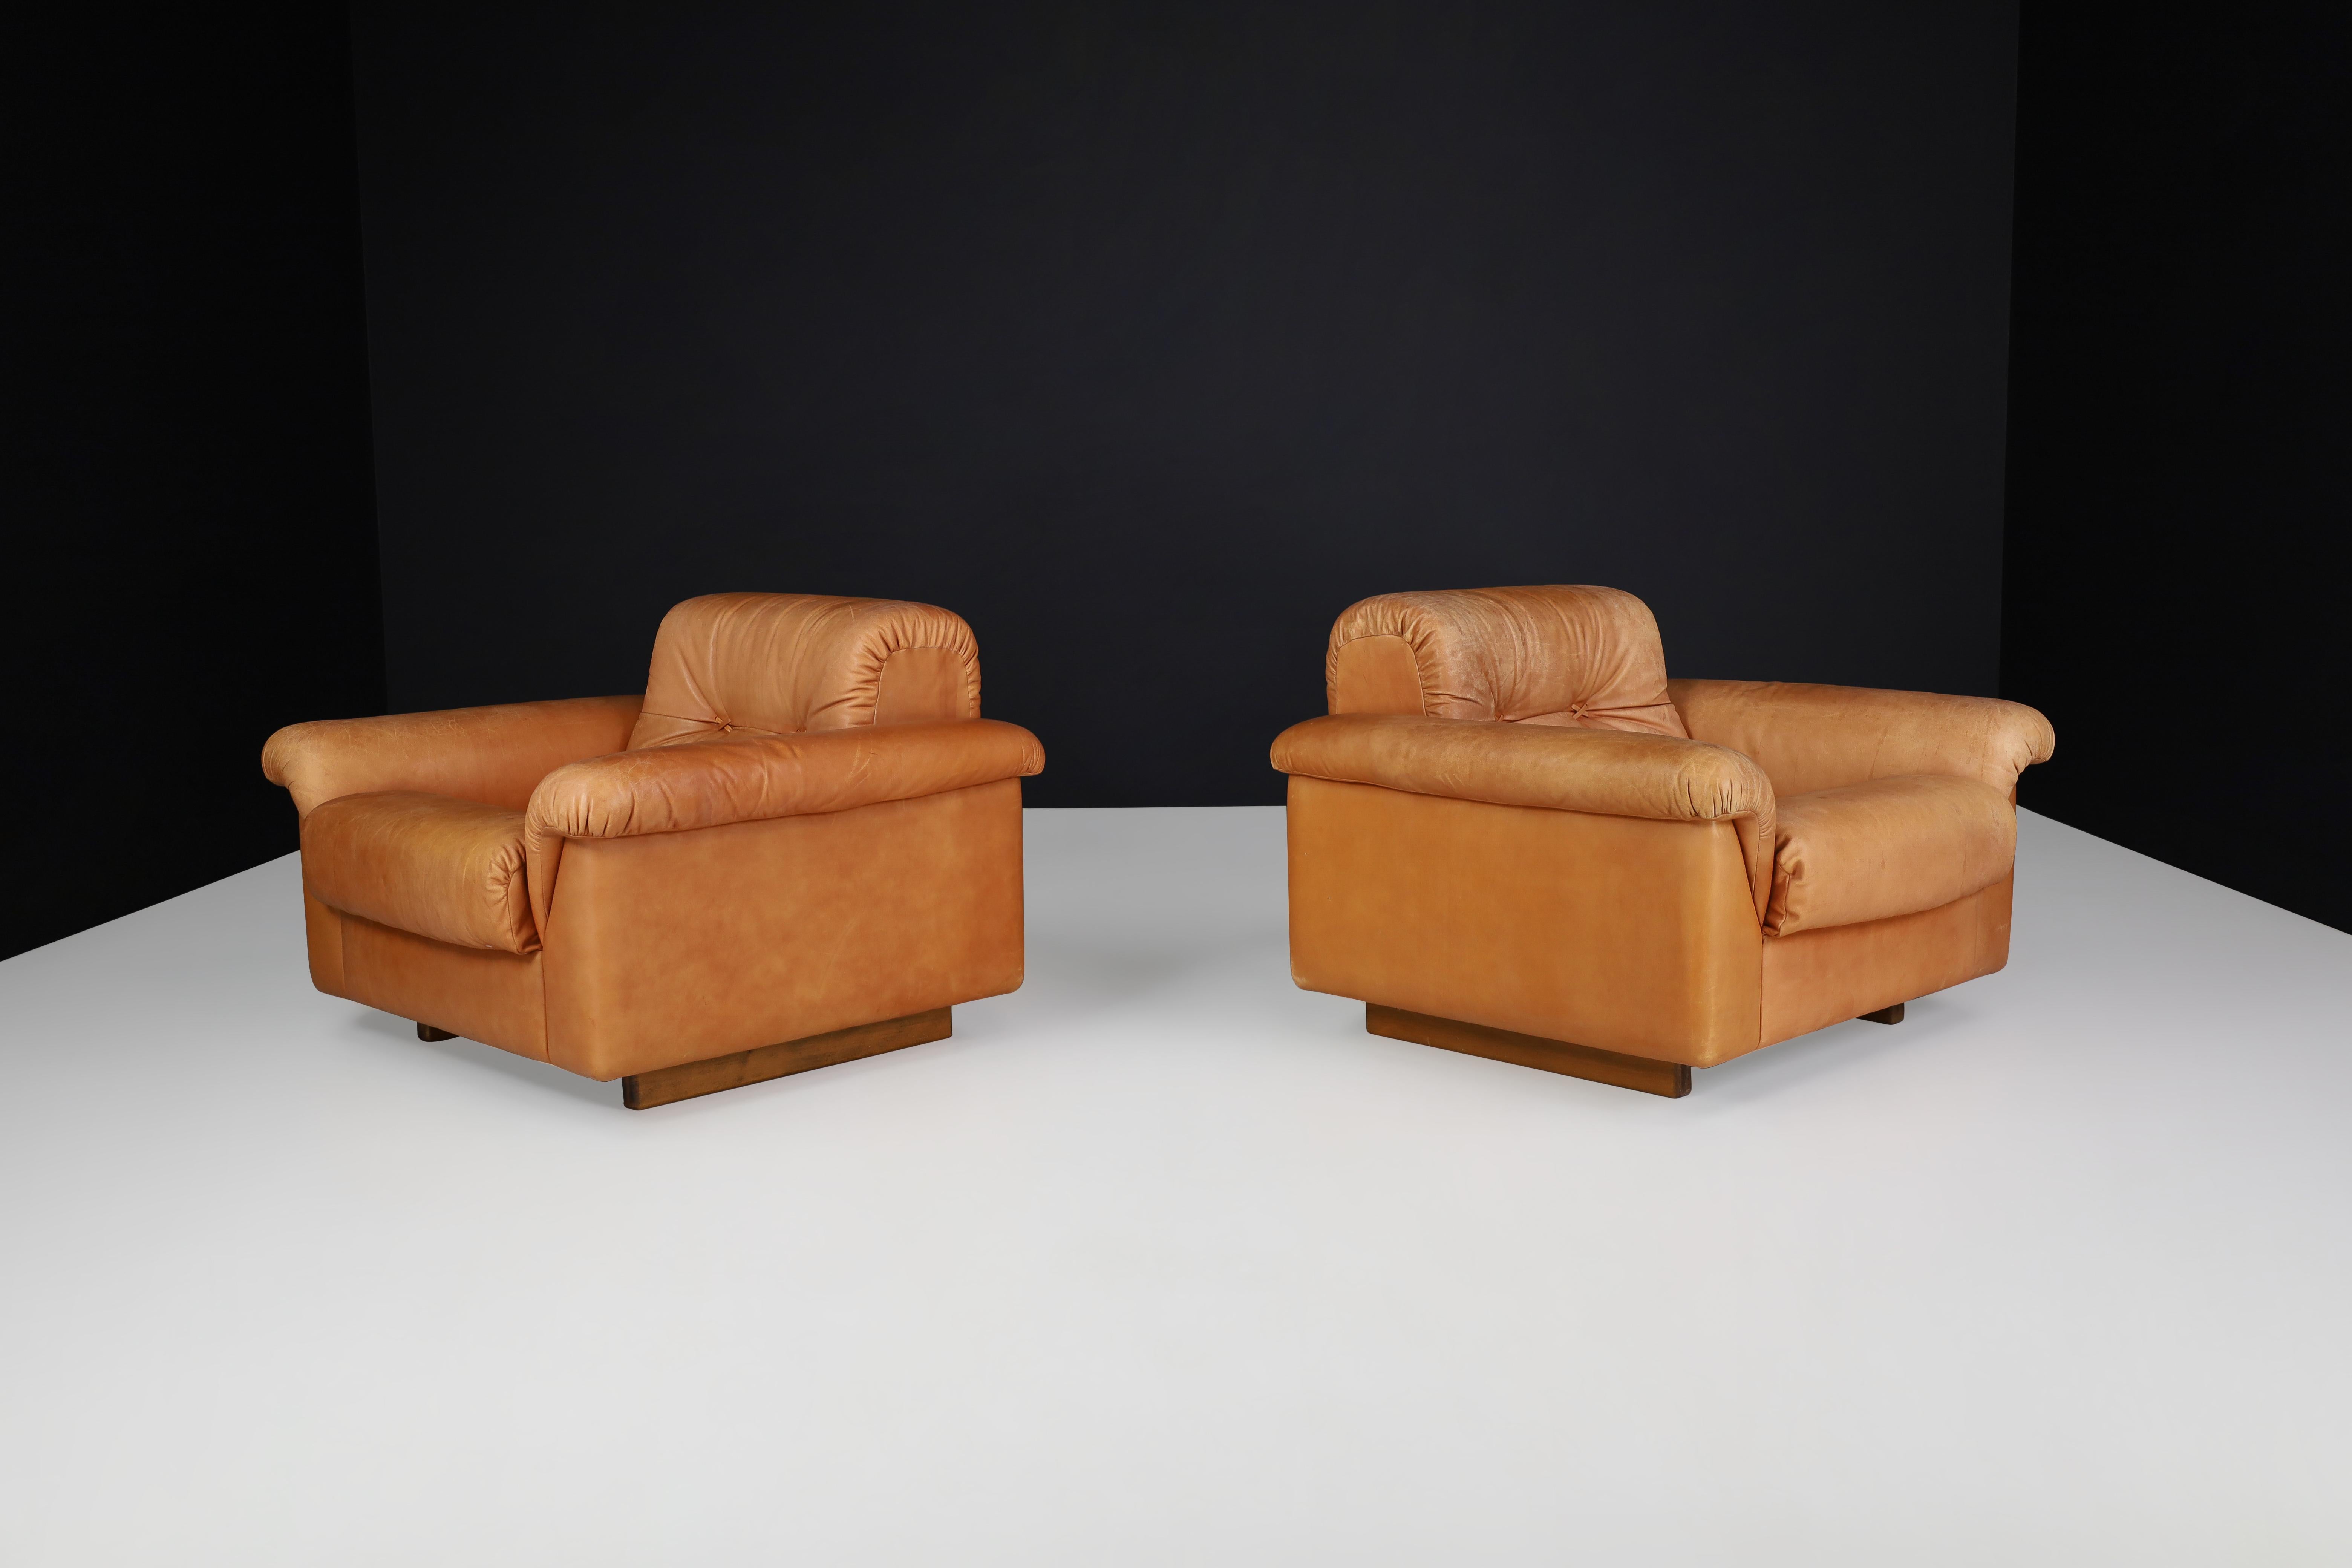 De Sede DS 45 Lounge Chairs in Patinated Leather, Switzerland, 1970s In Good Condition For Sale In Almelo, NL